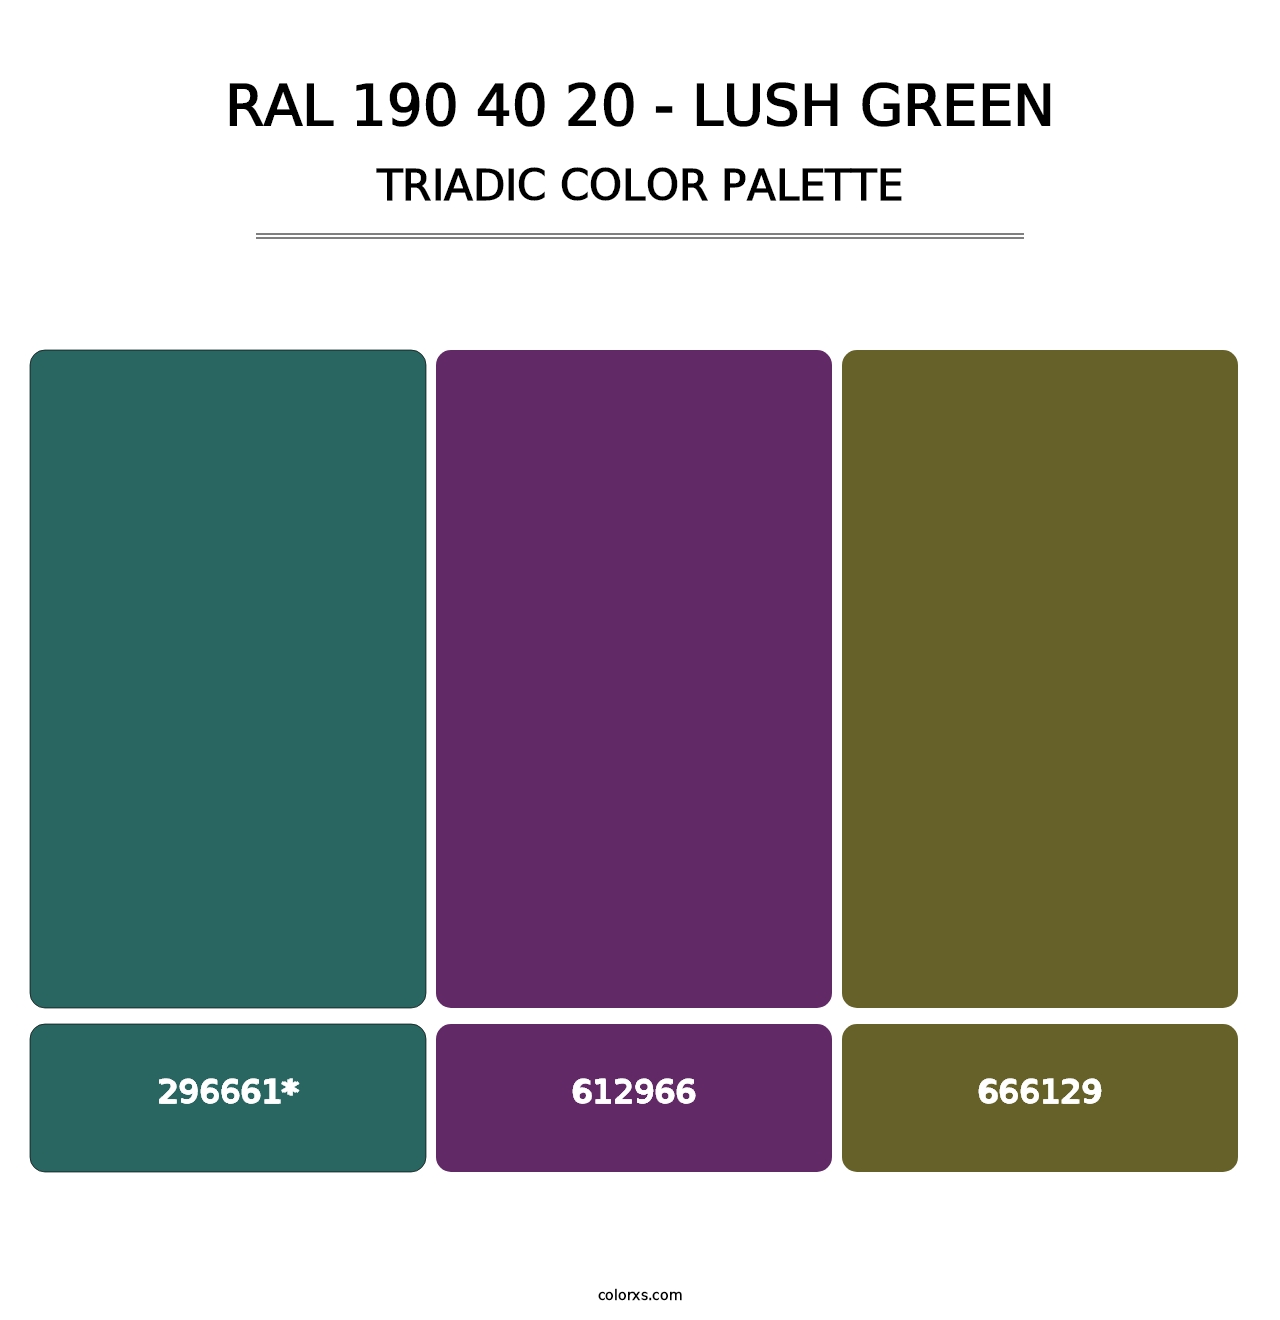 RAL 190 40 20 - Lush Green - Triadic Color Palette